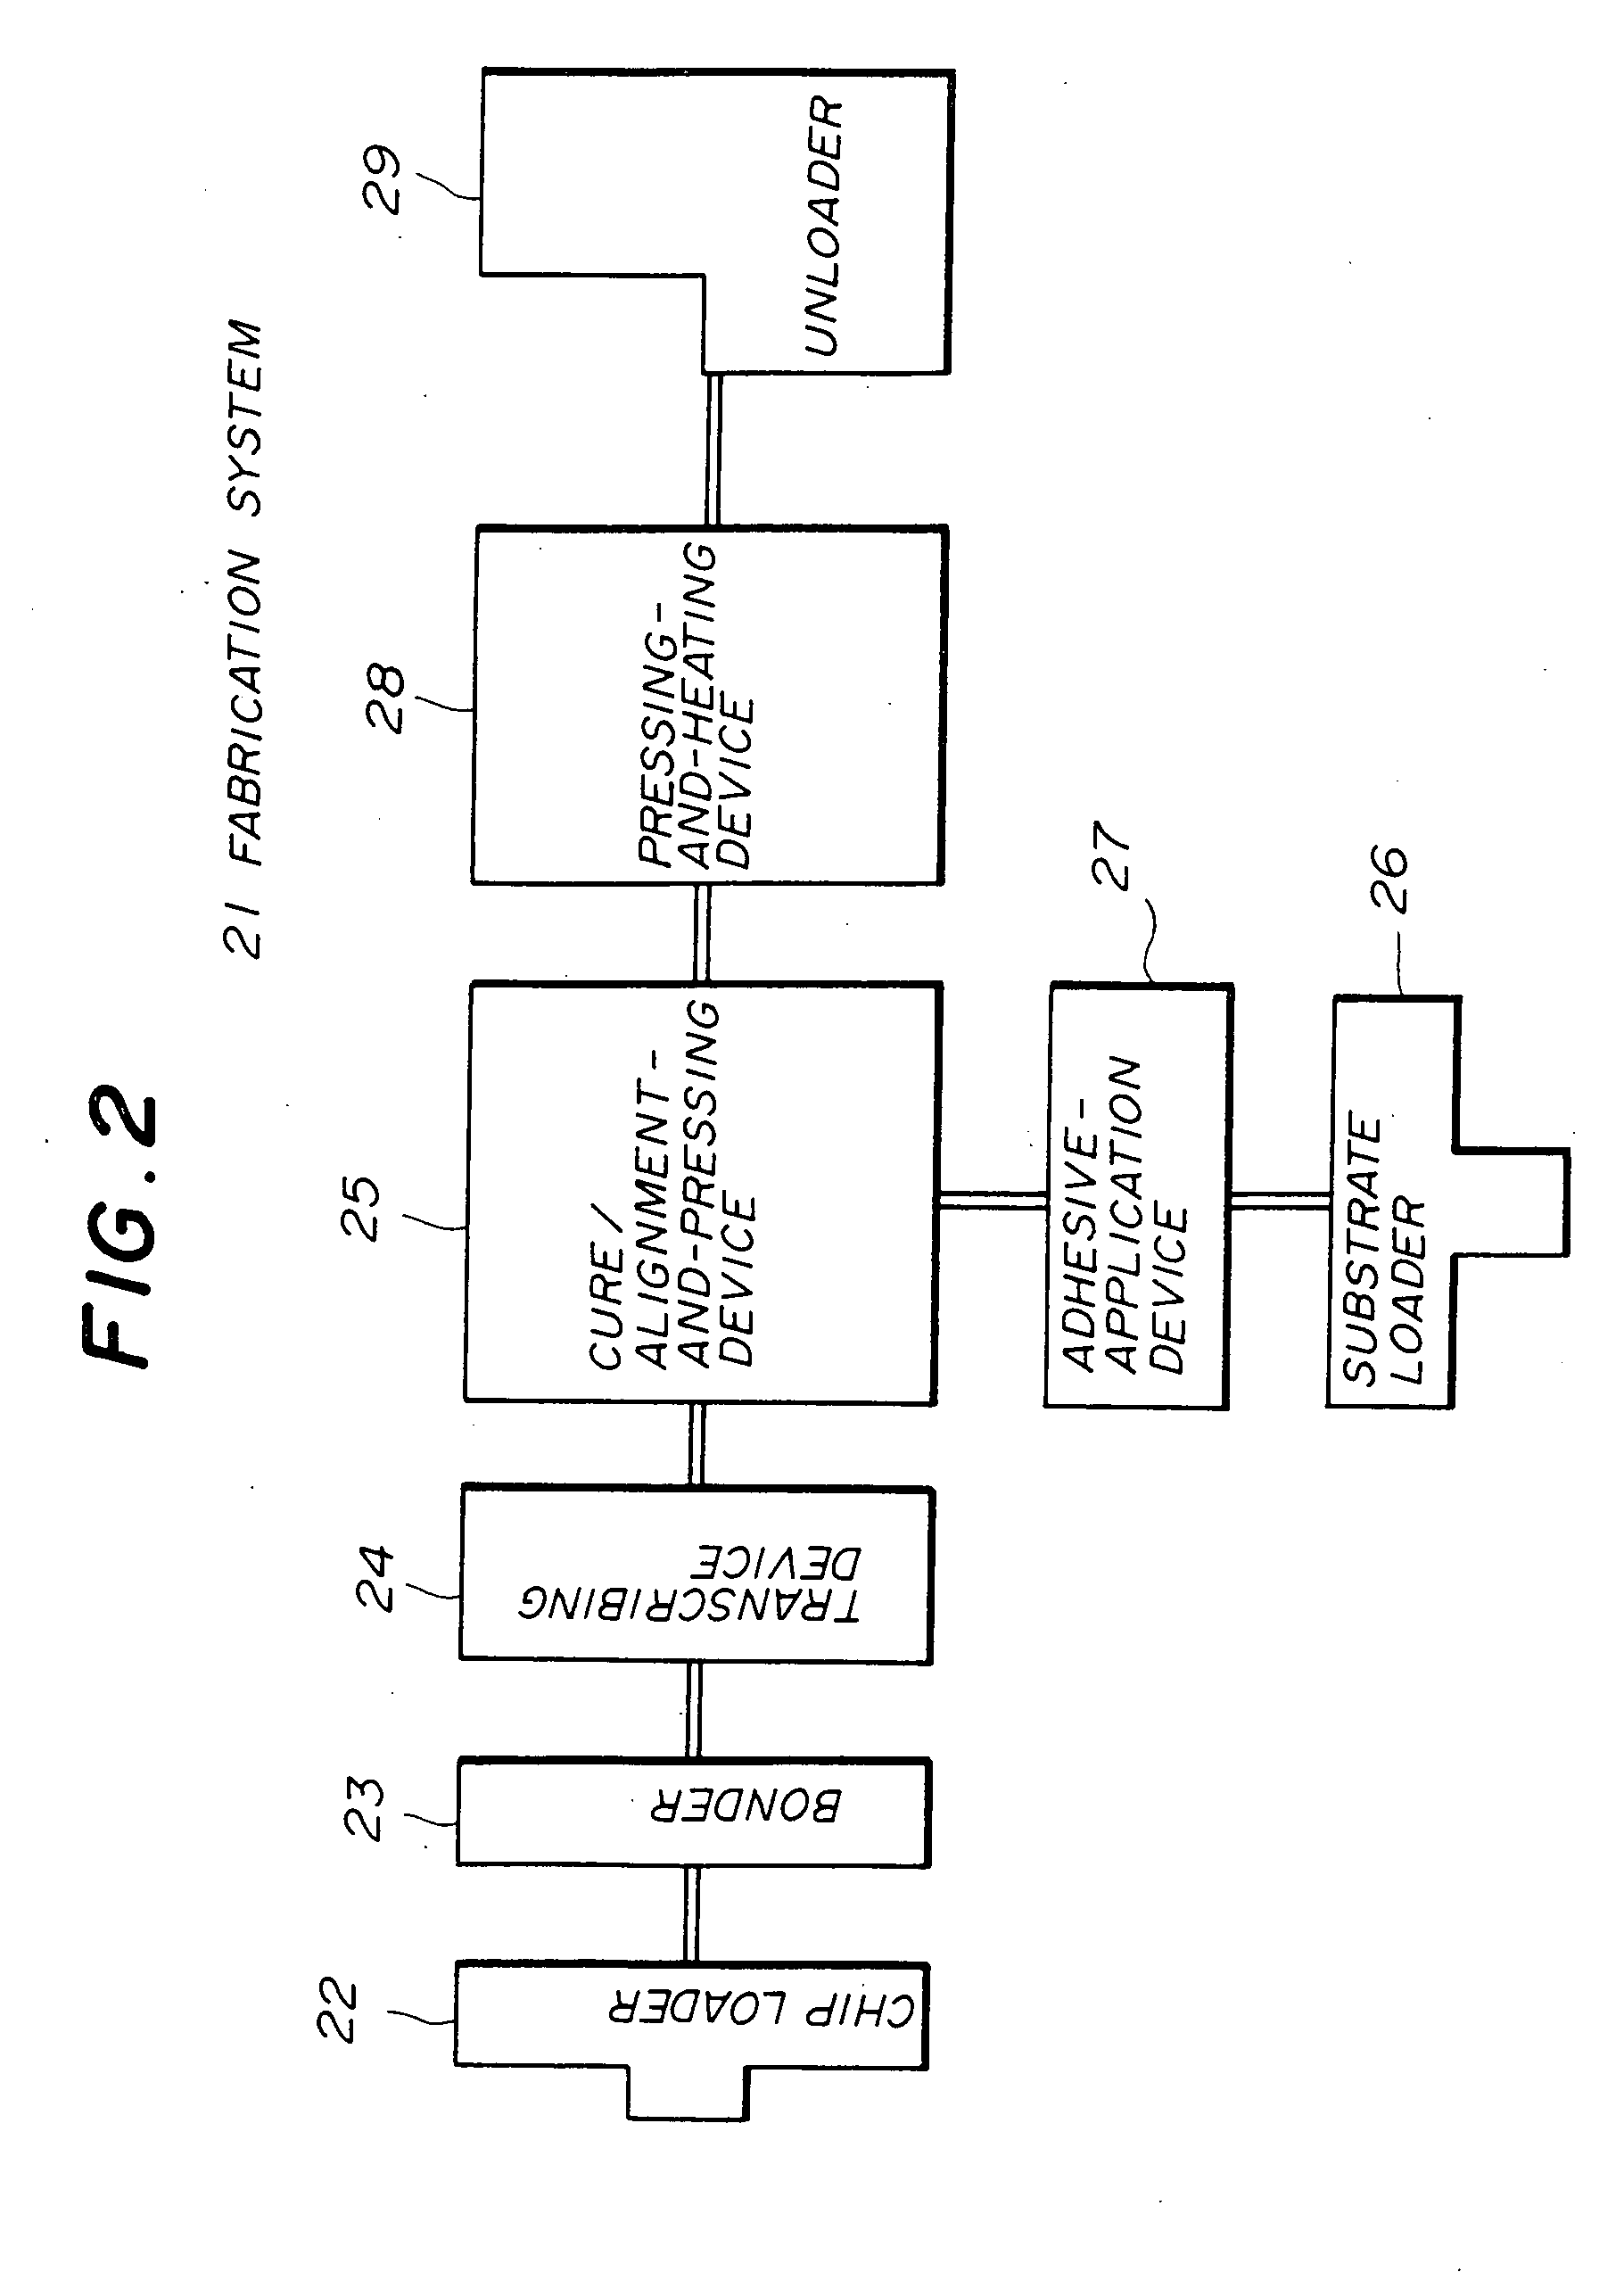 Method and system for fabricating a semiconductor device